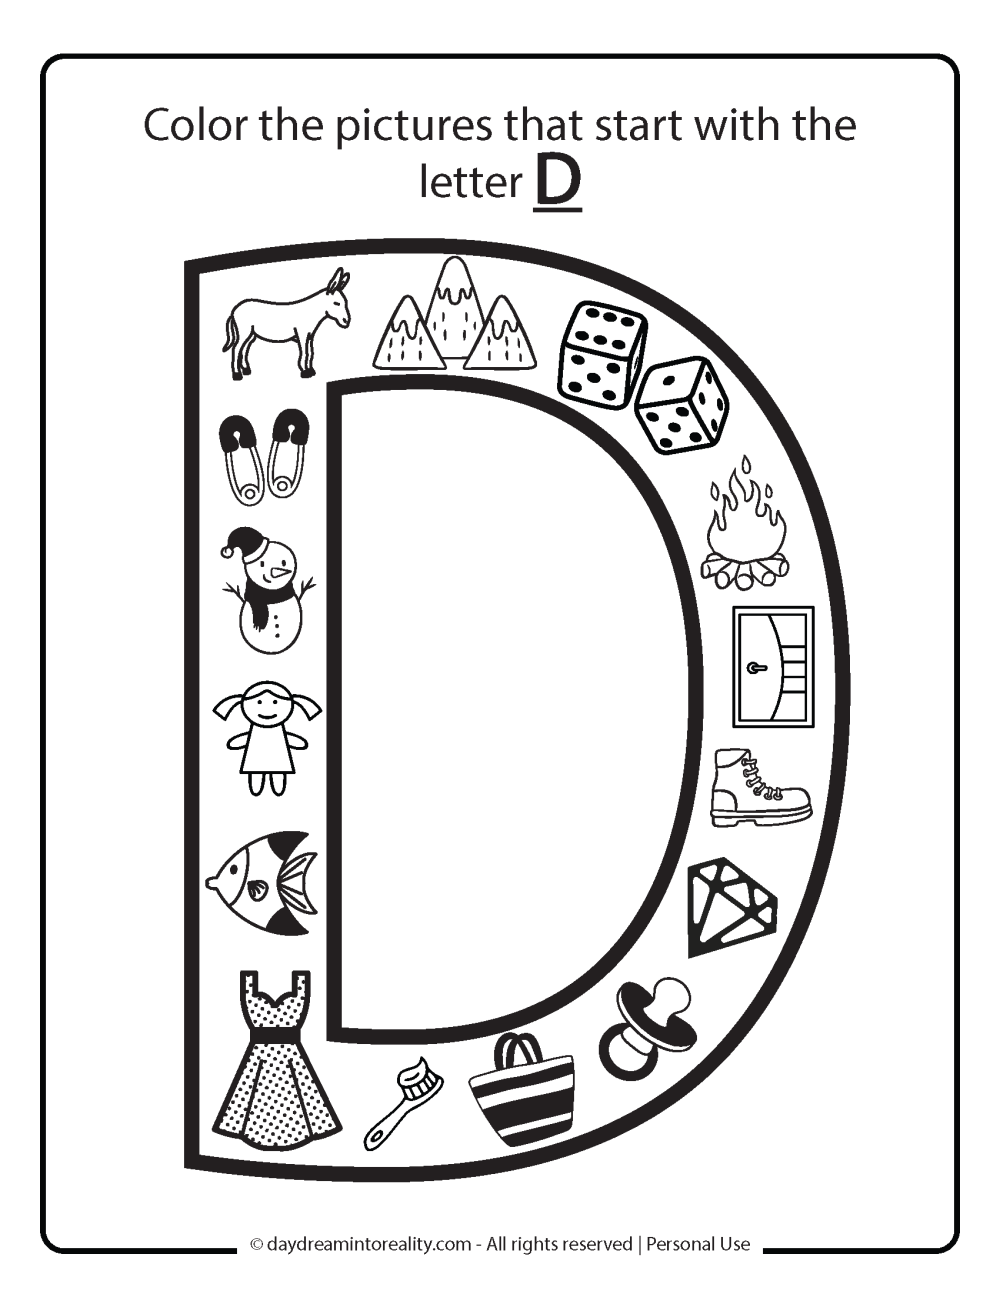 Letter D worksheet free printables - color picture that starts with D